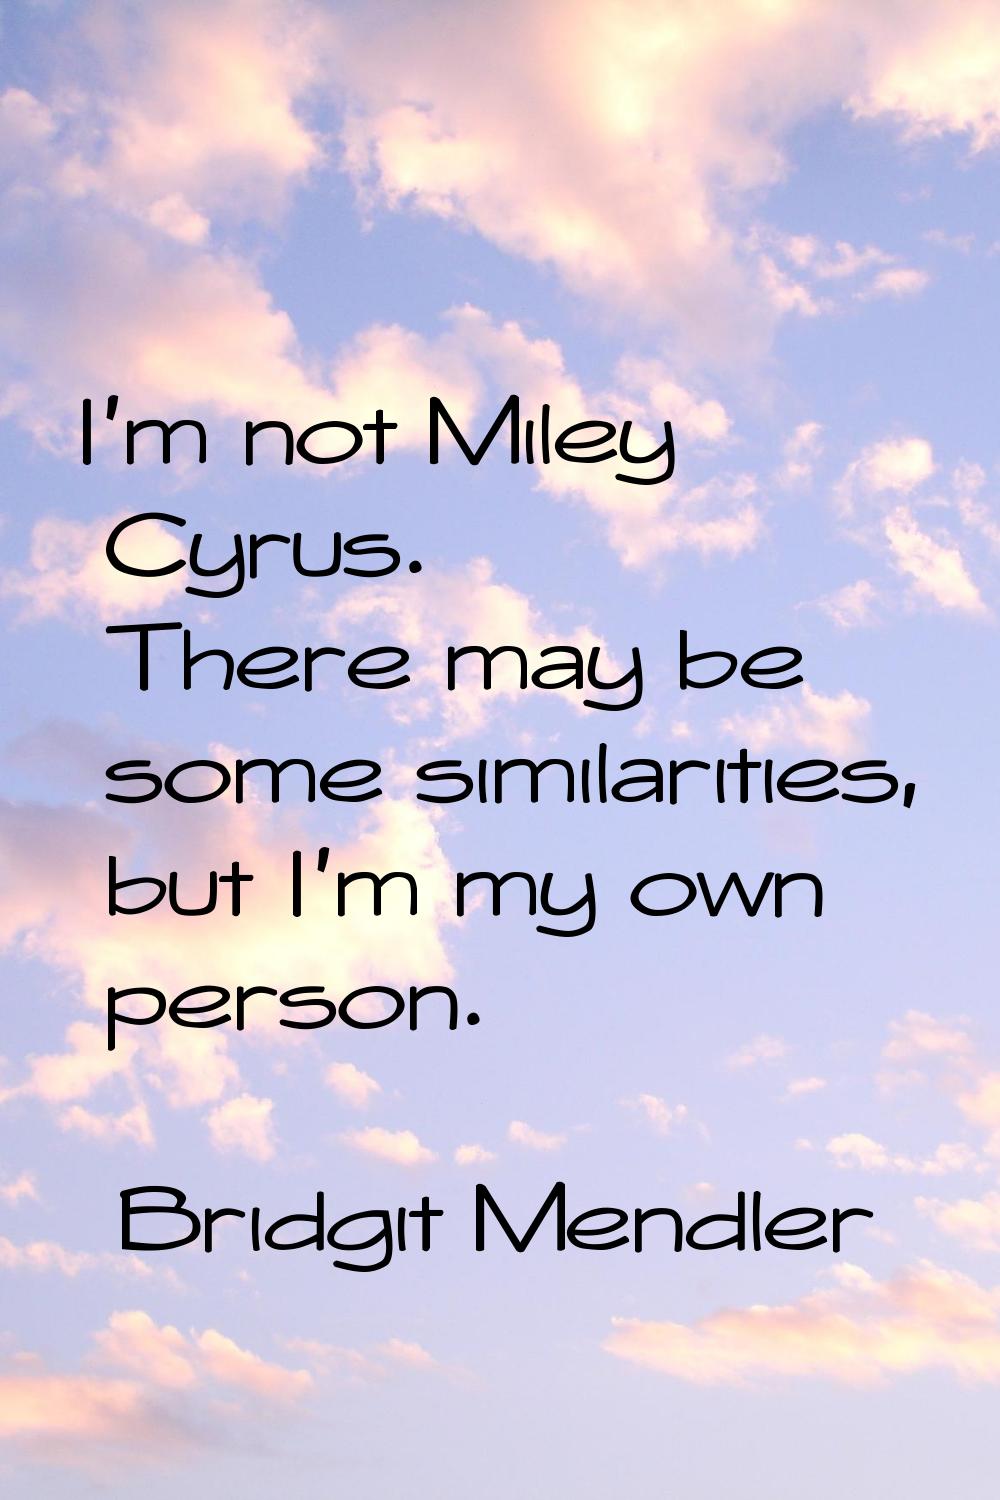 I'm not Miley Cyrus. There may be some similarities, but I'm my own person.